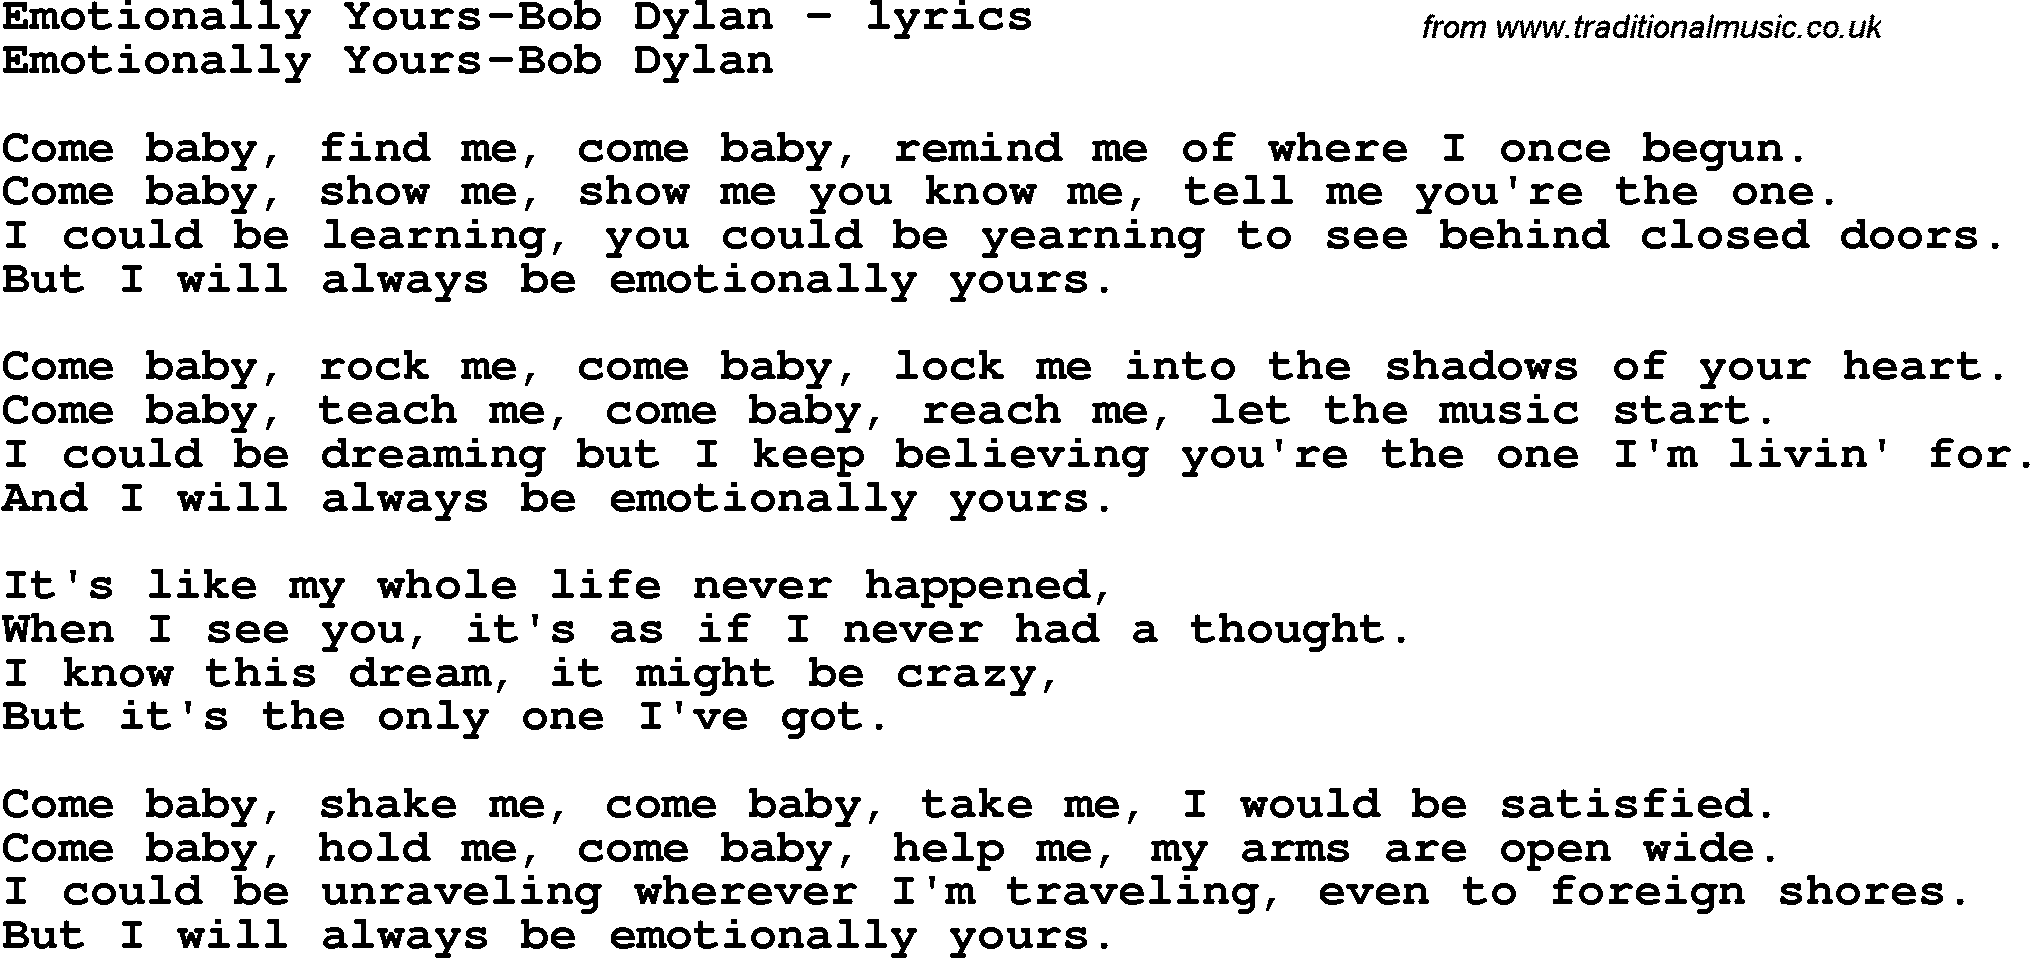 Love Song Lyrics for: Emotionally Yours-Bob Dylan